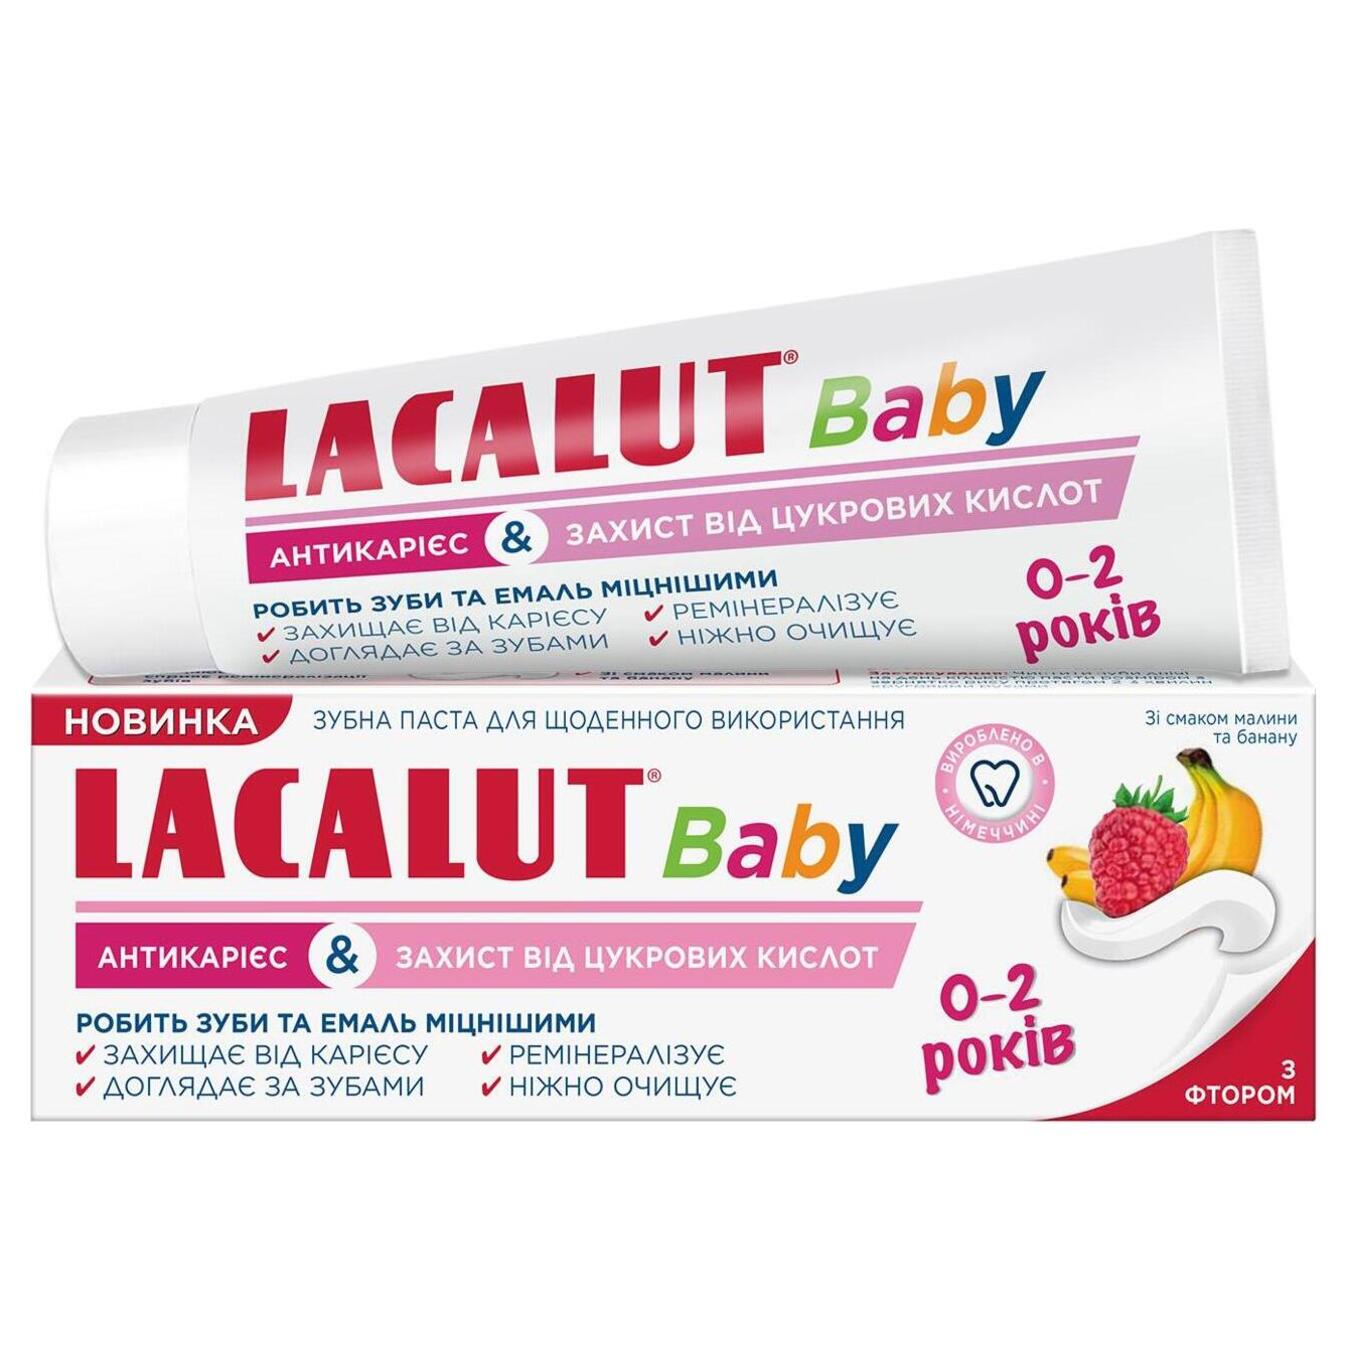 Toothpaste Lacalut Baby anti-caries and protection against sugar acids 55 ml